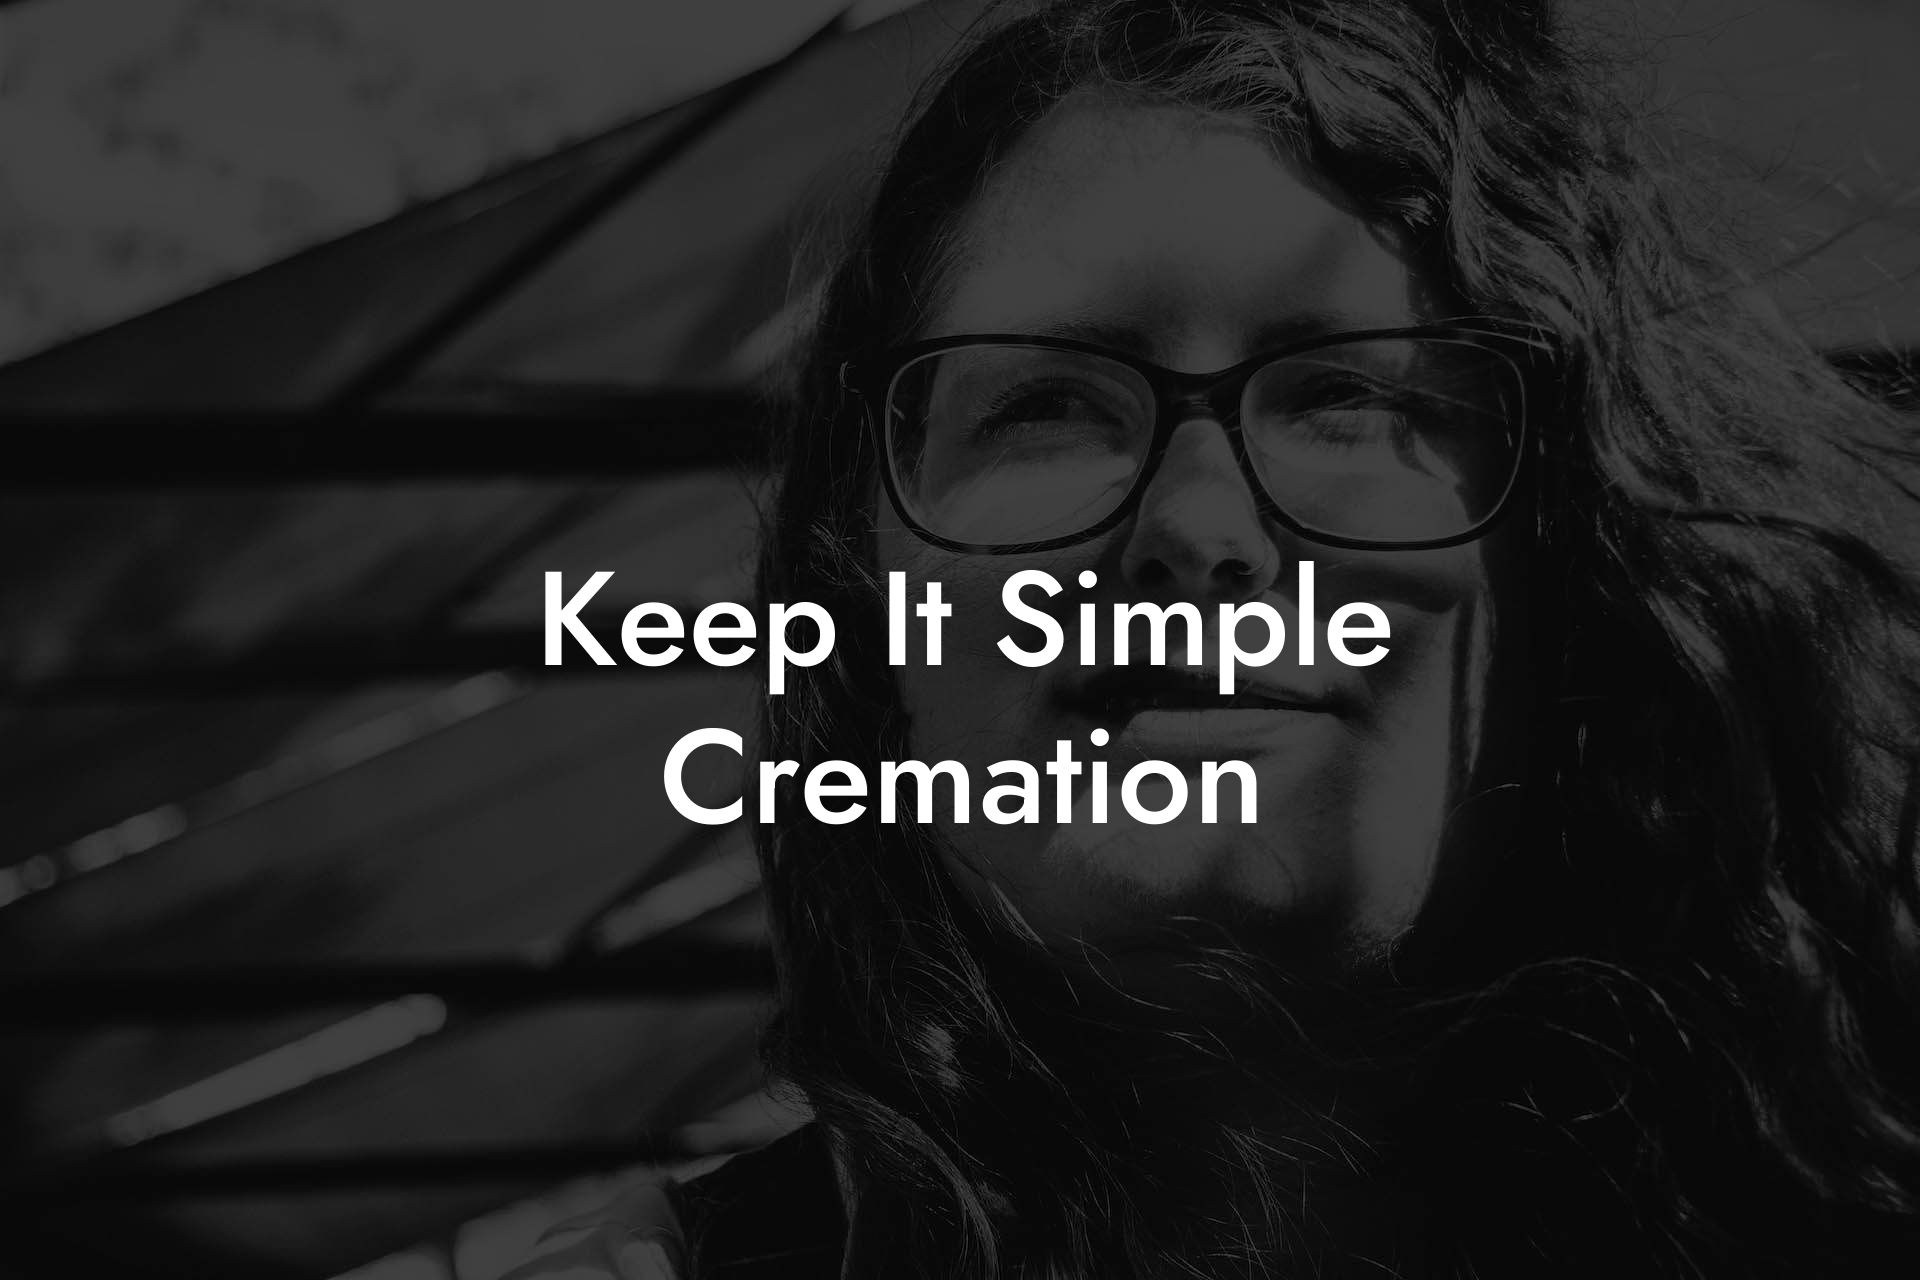 Keep It Simple Cremation